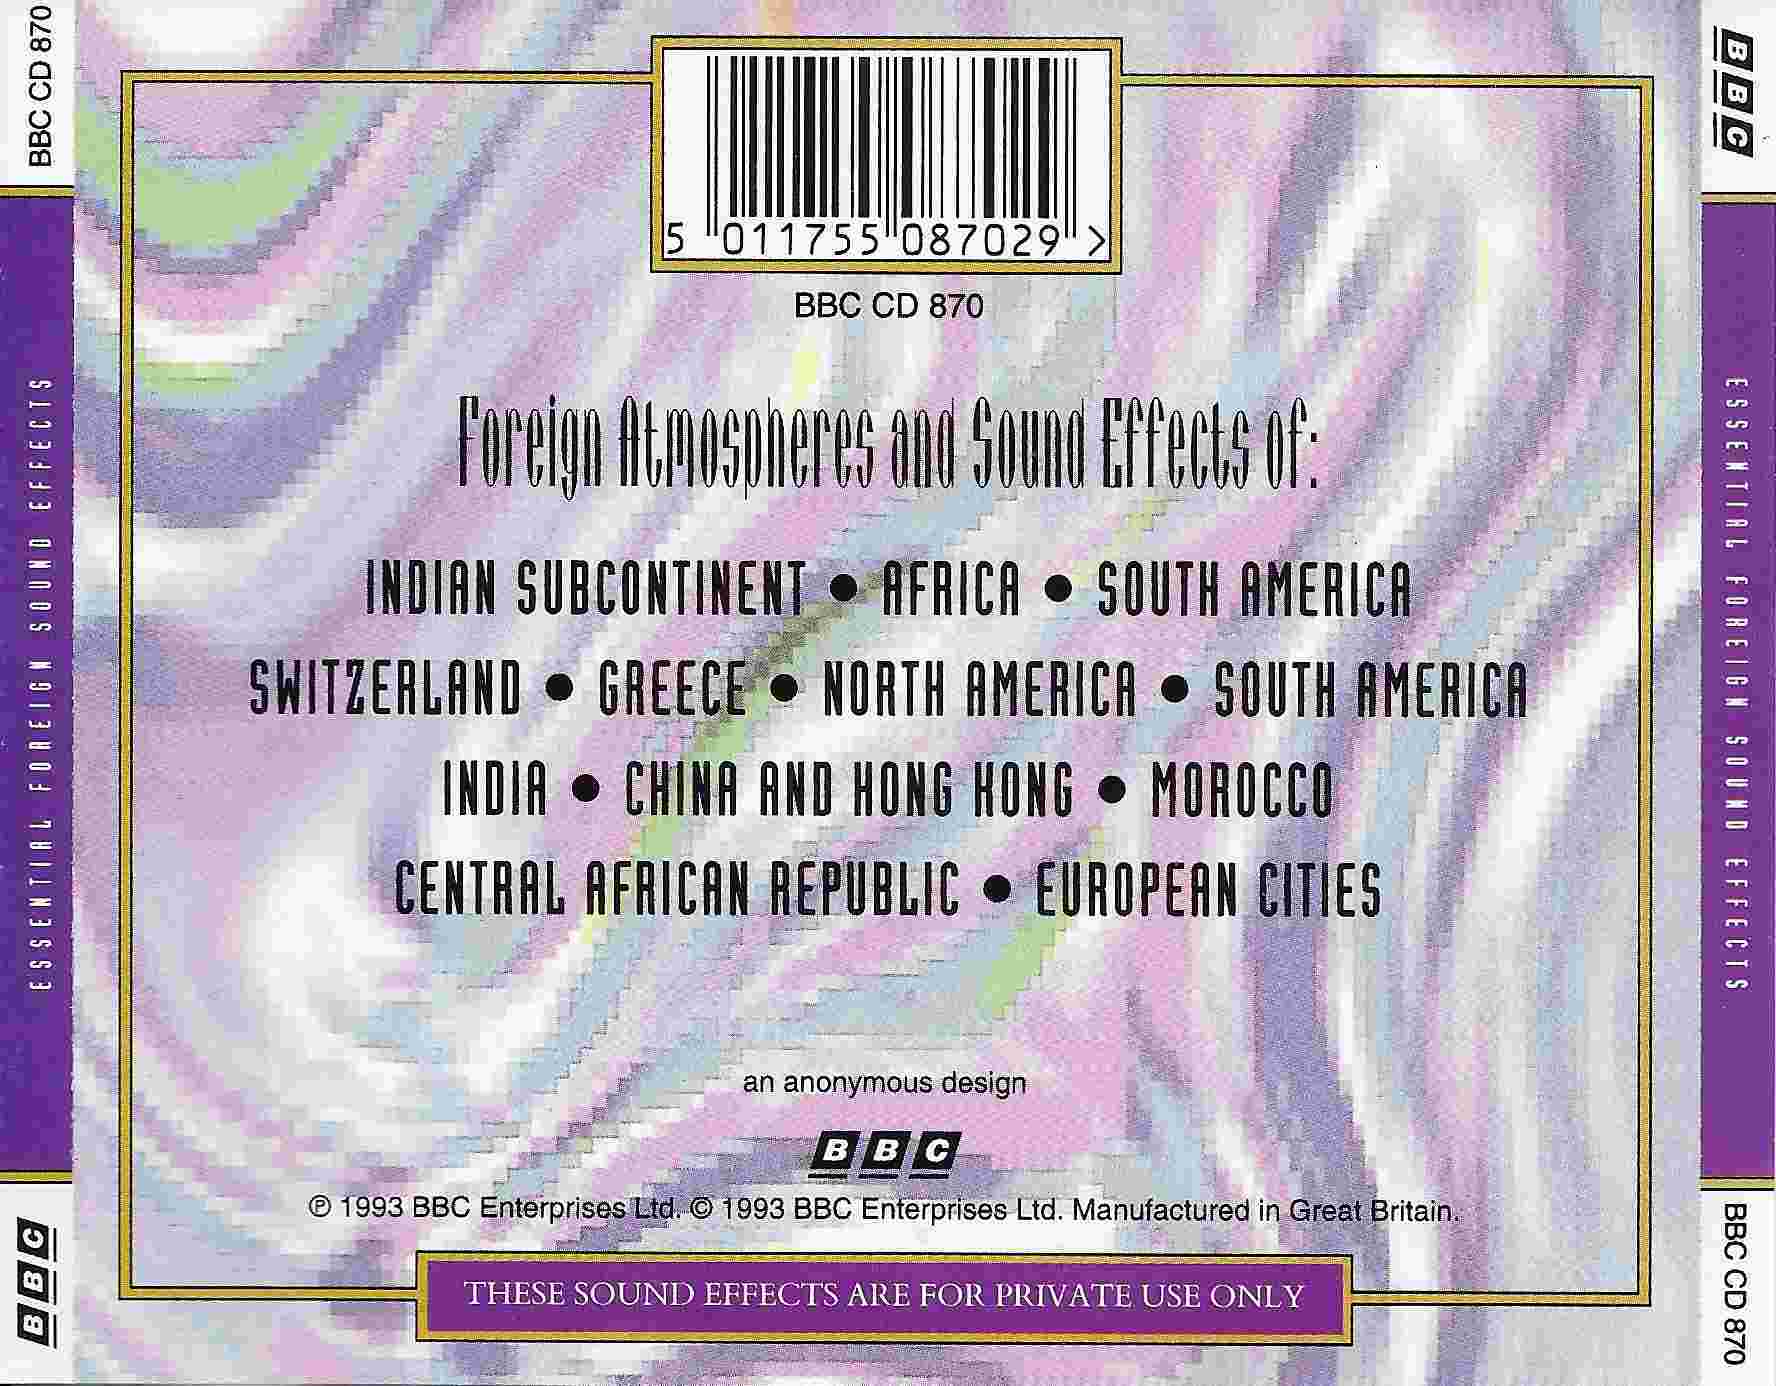 Back cover of BBCCD870